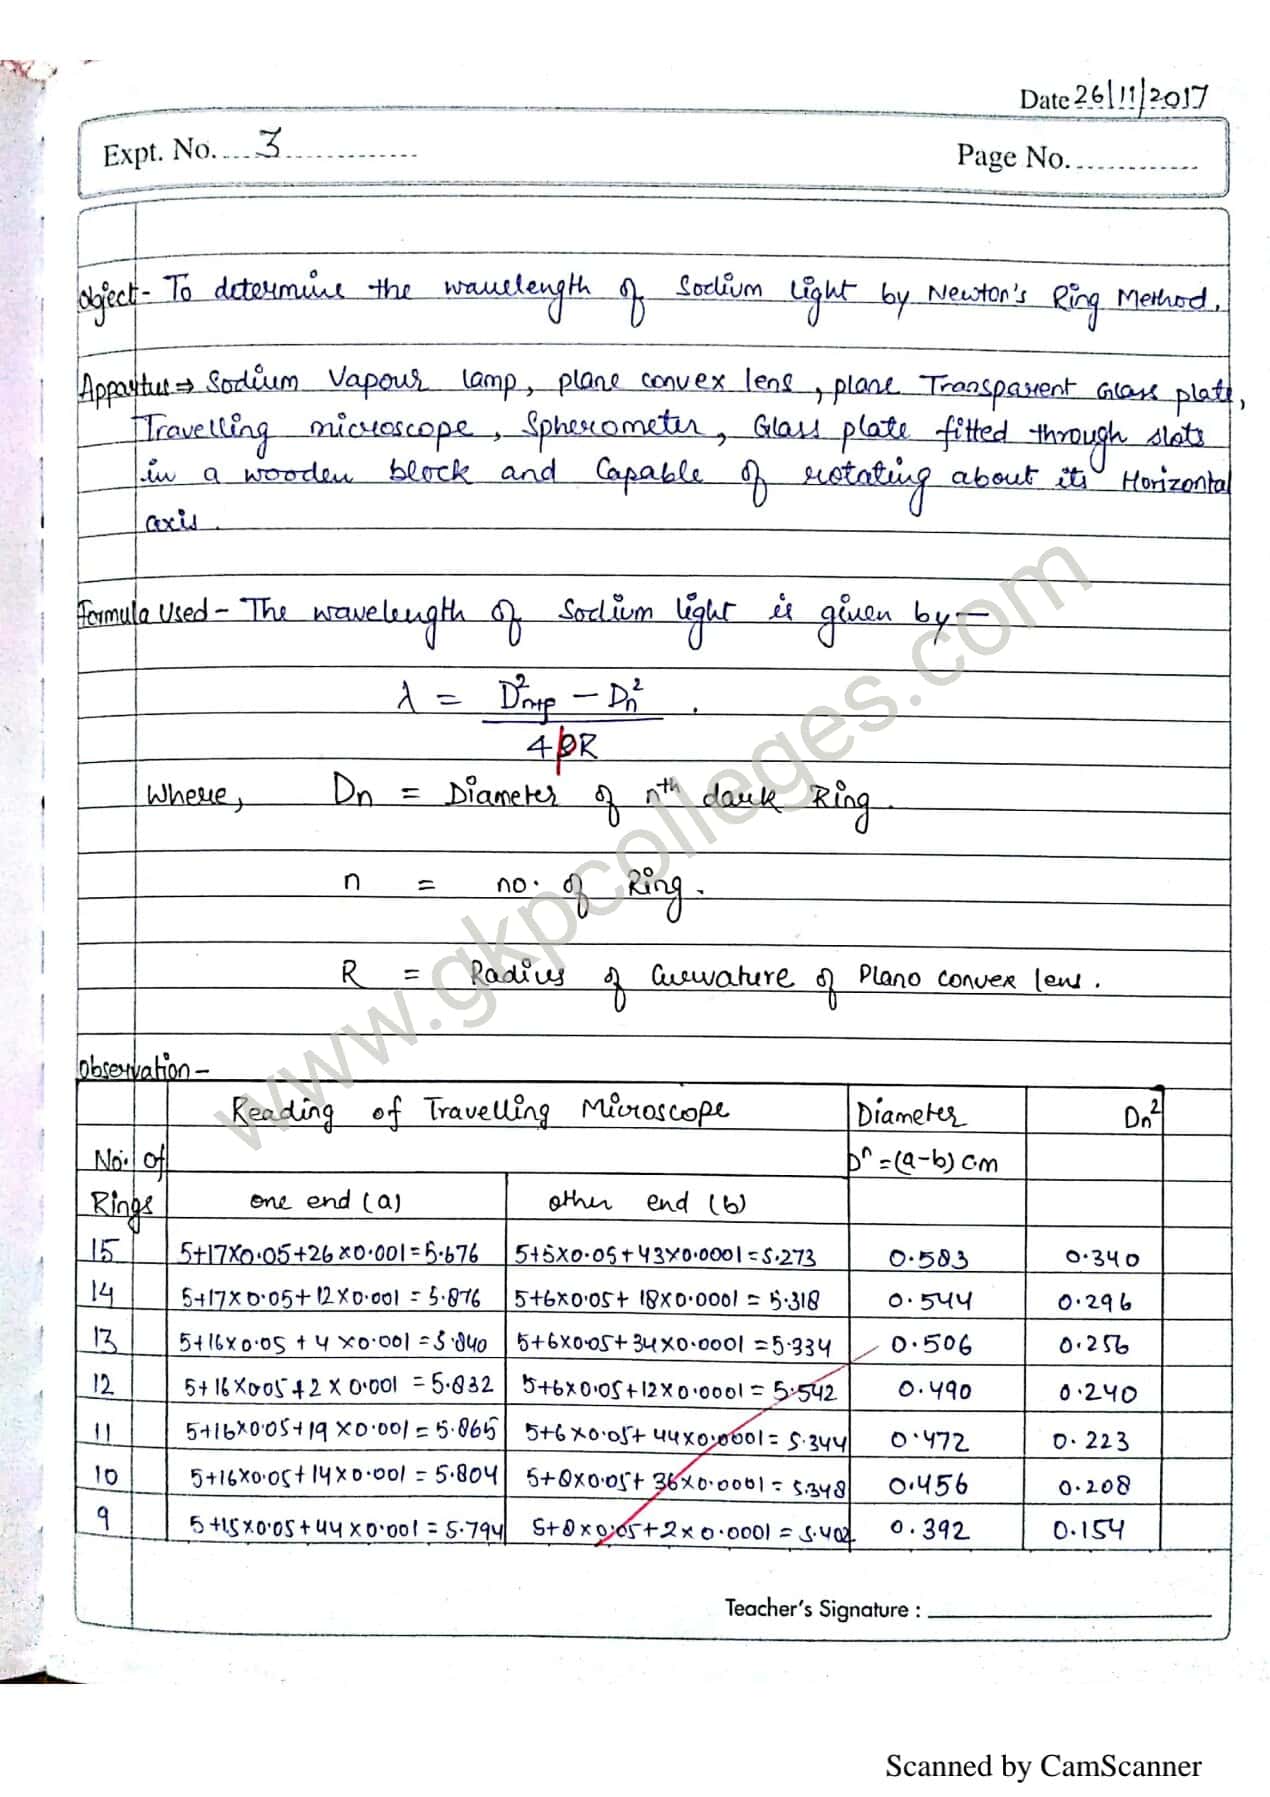 Physics(Optics) Practical Notes of B.Sc. 2nd Year Student for DDU and St. Andrew's PG College, Gorakhpur